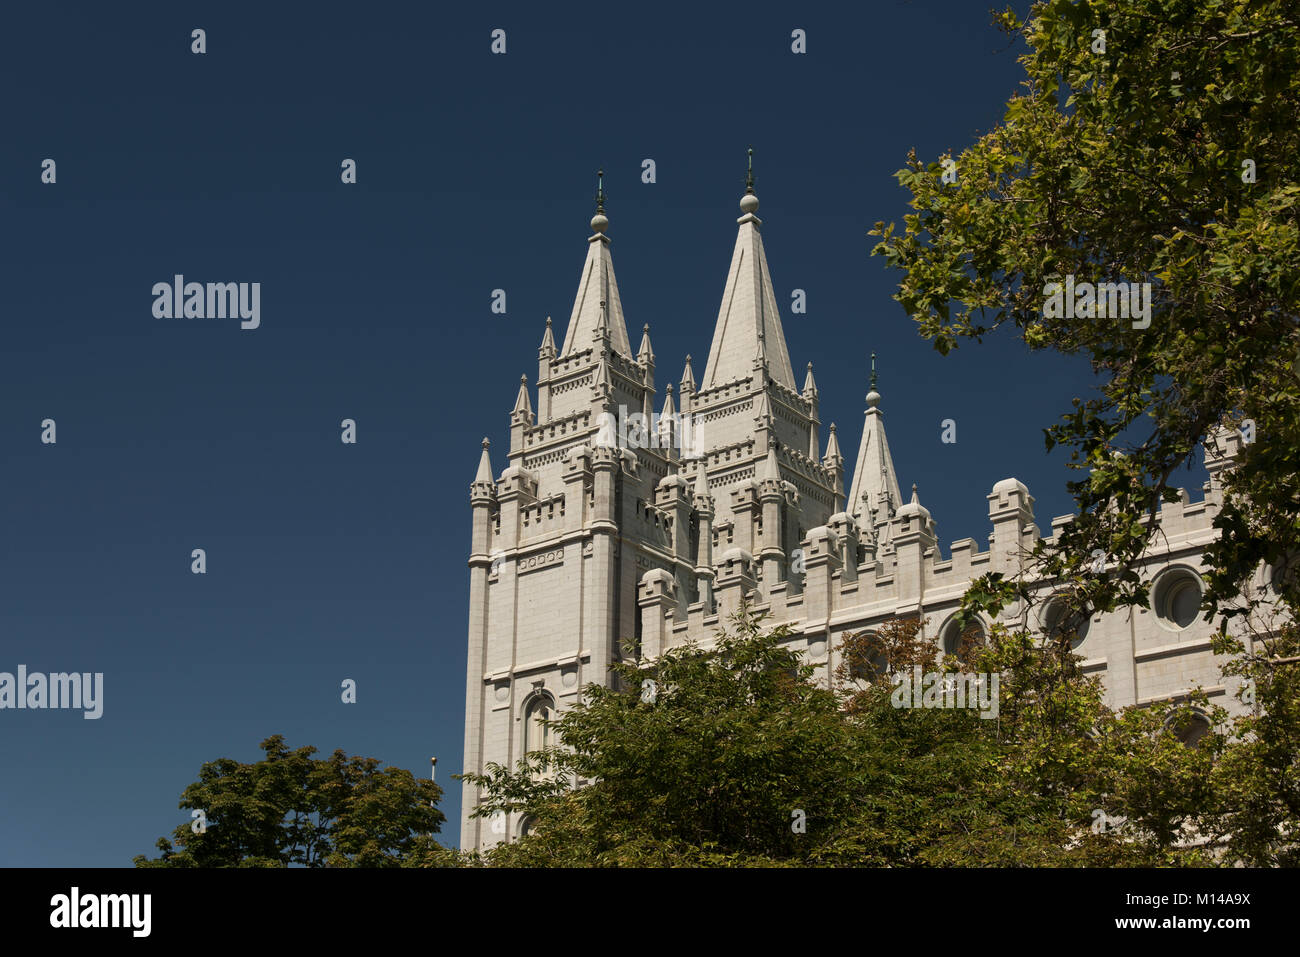 A detail of the Salt Lake Temple in Temple Square, Salt Lake City, Utah, USA, from the South visitors center.  Built by Mormon pioneers between 1853 a Stock Photo